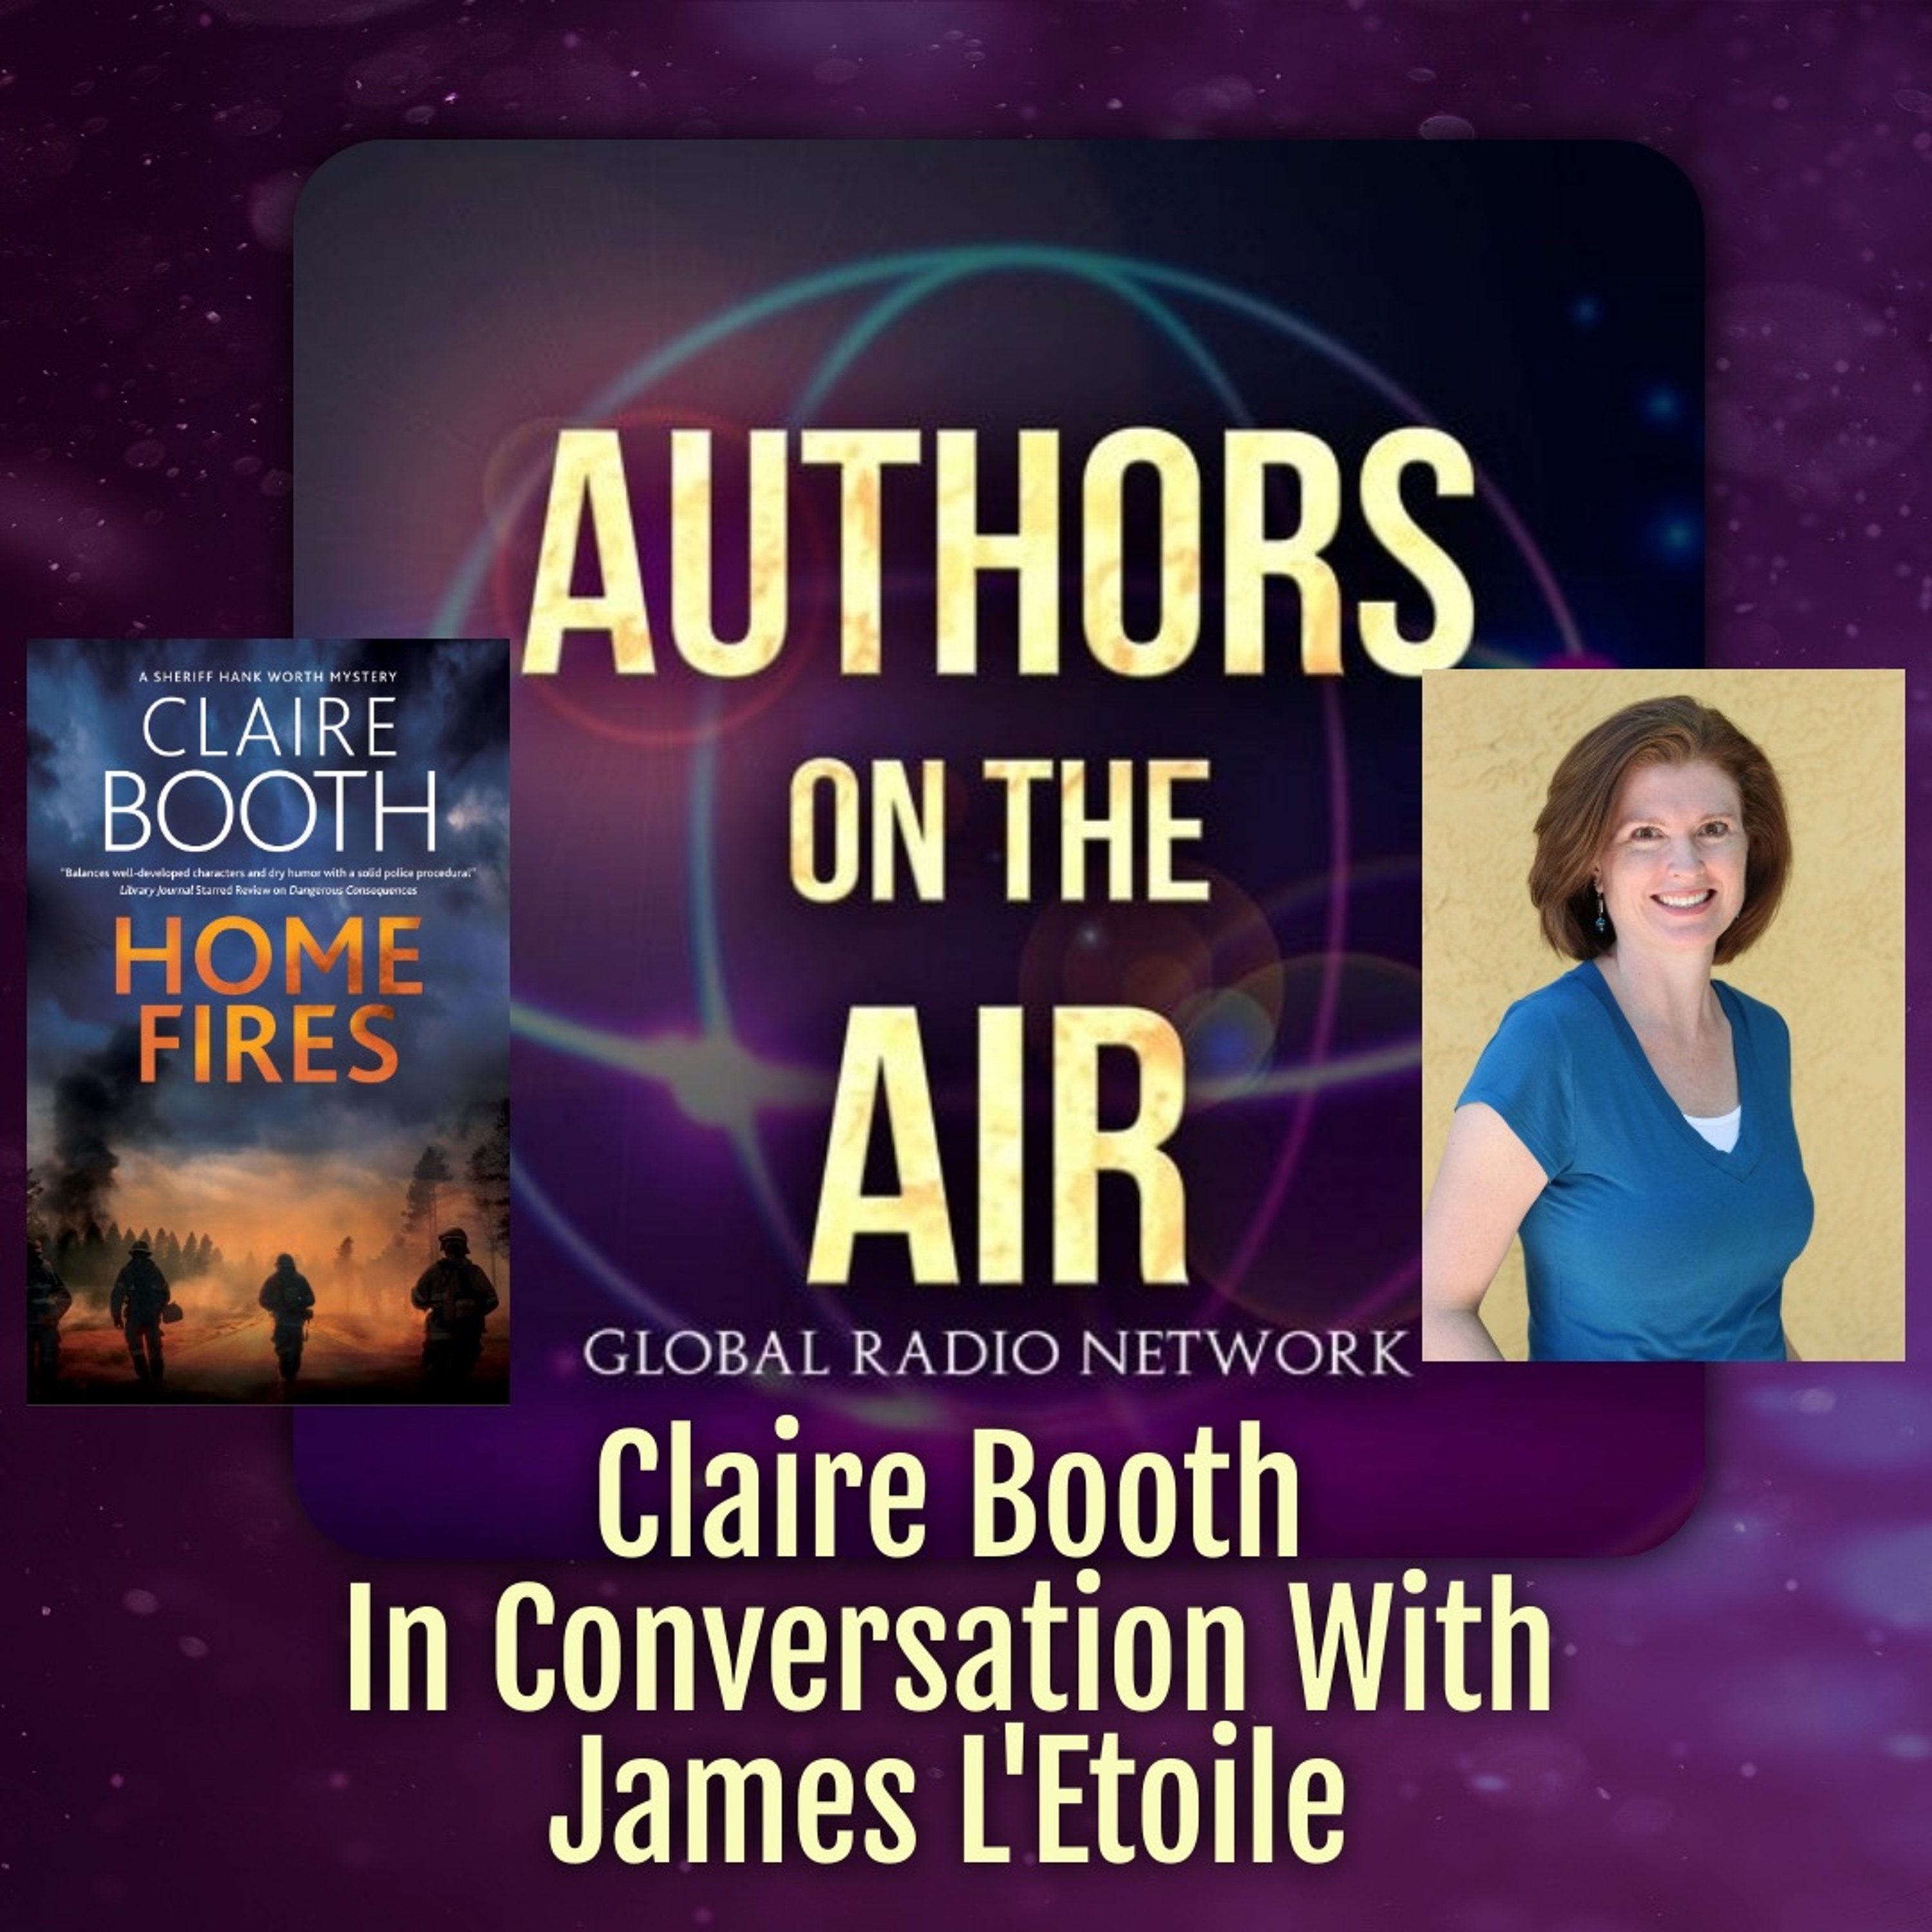 Claire Booth -- Home Fires Authors on the Air